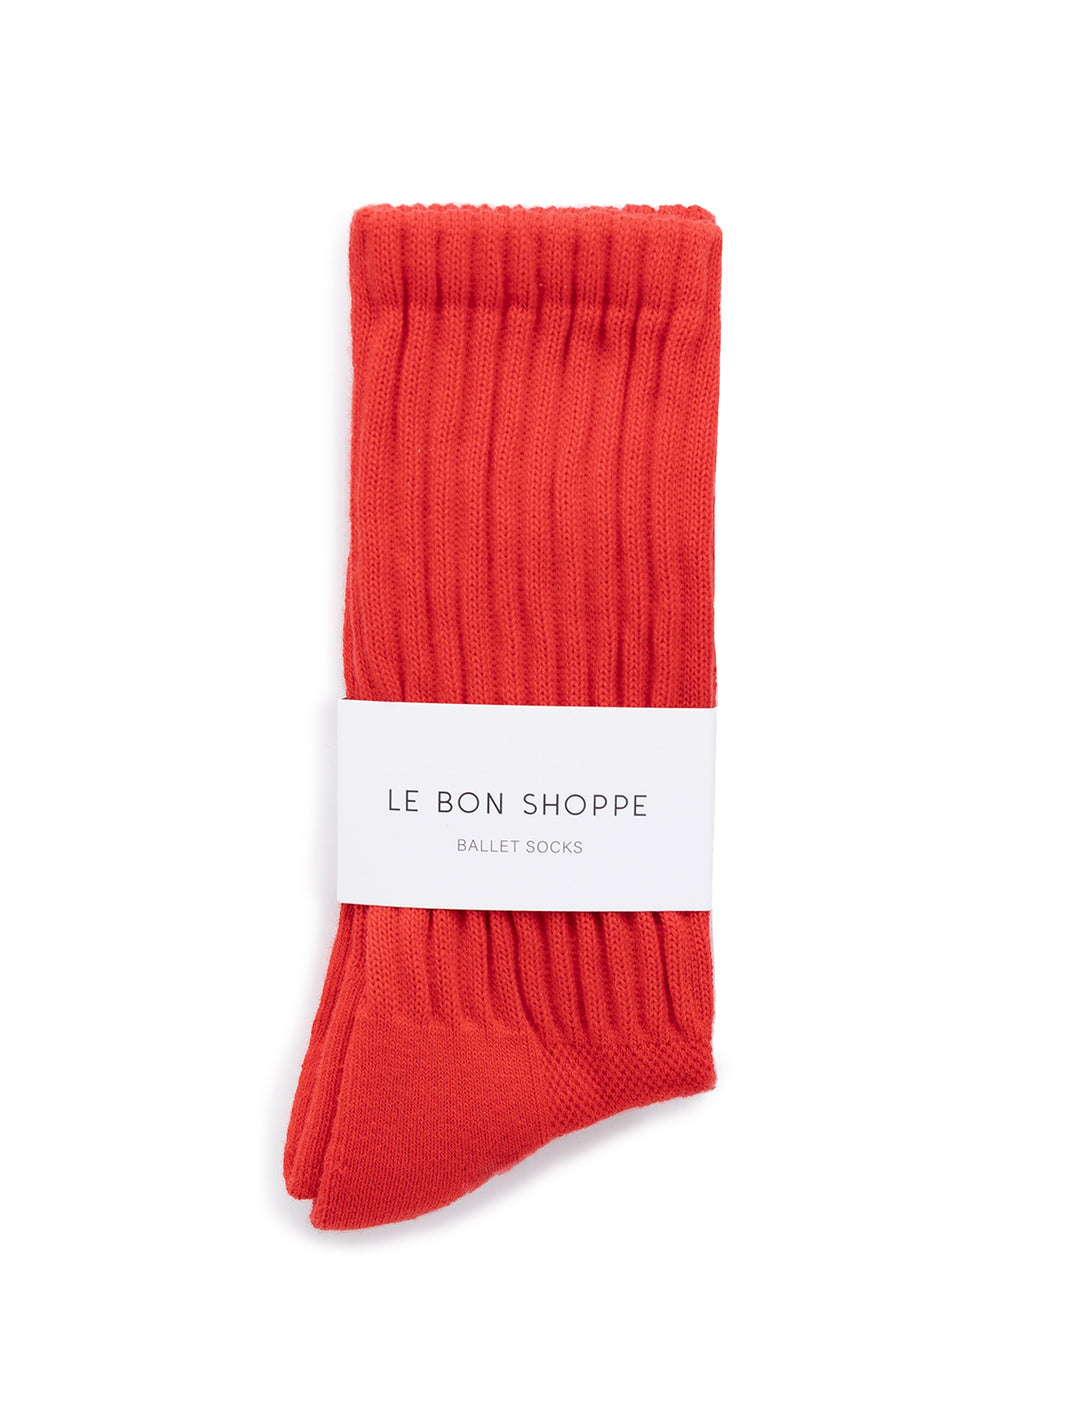 Front view of Le Bon Shoppe's ballet socks in strawberry.